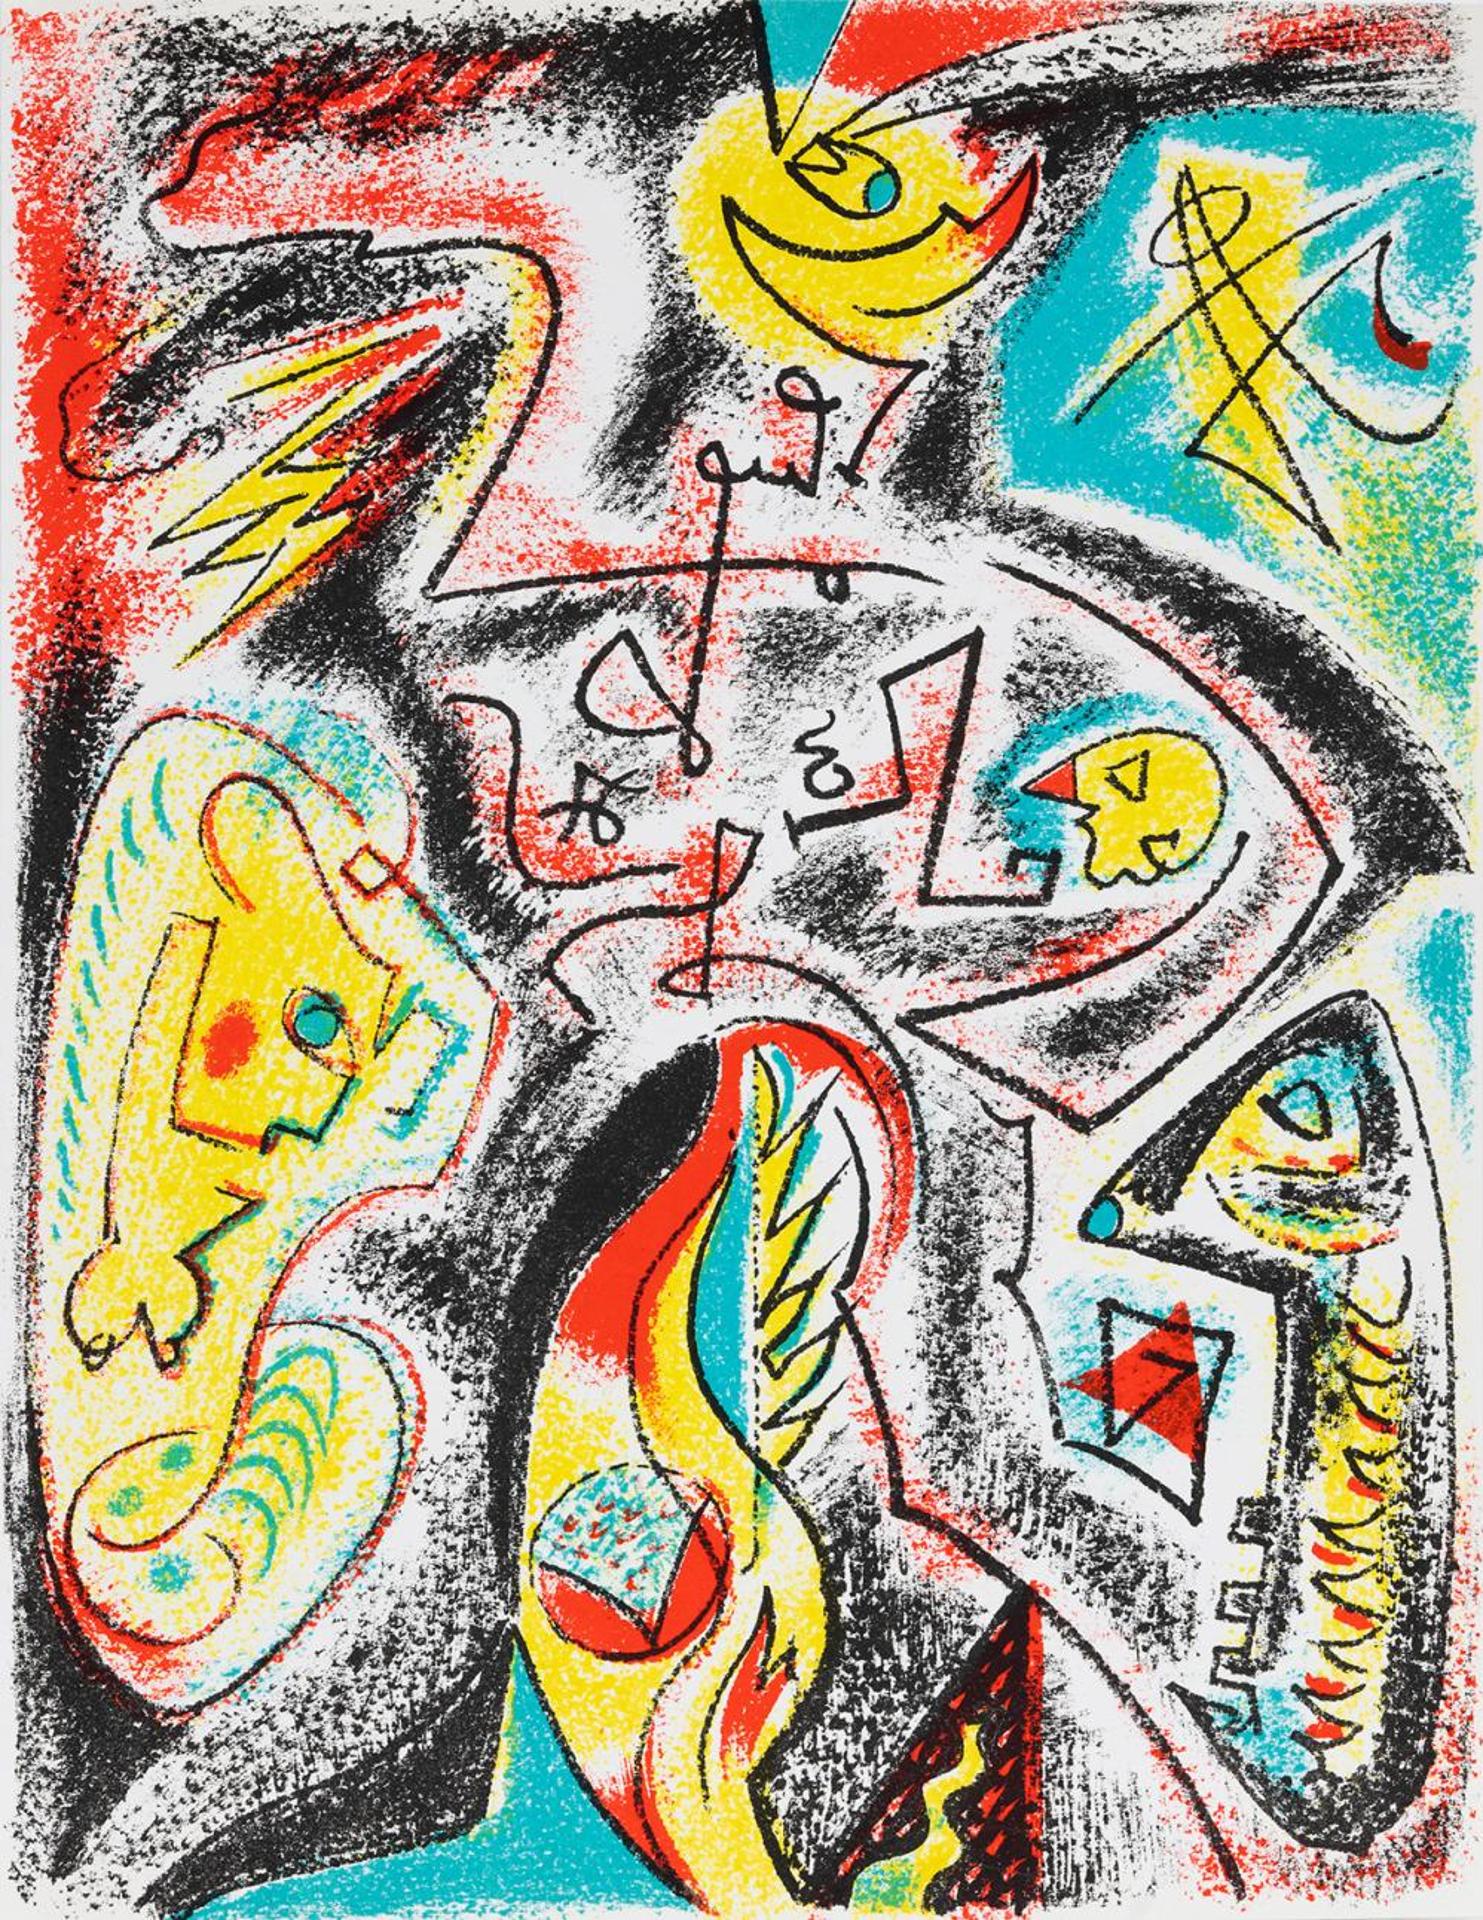 André Masson (1896-1987) - Untitled